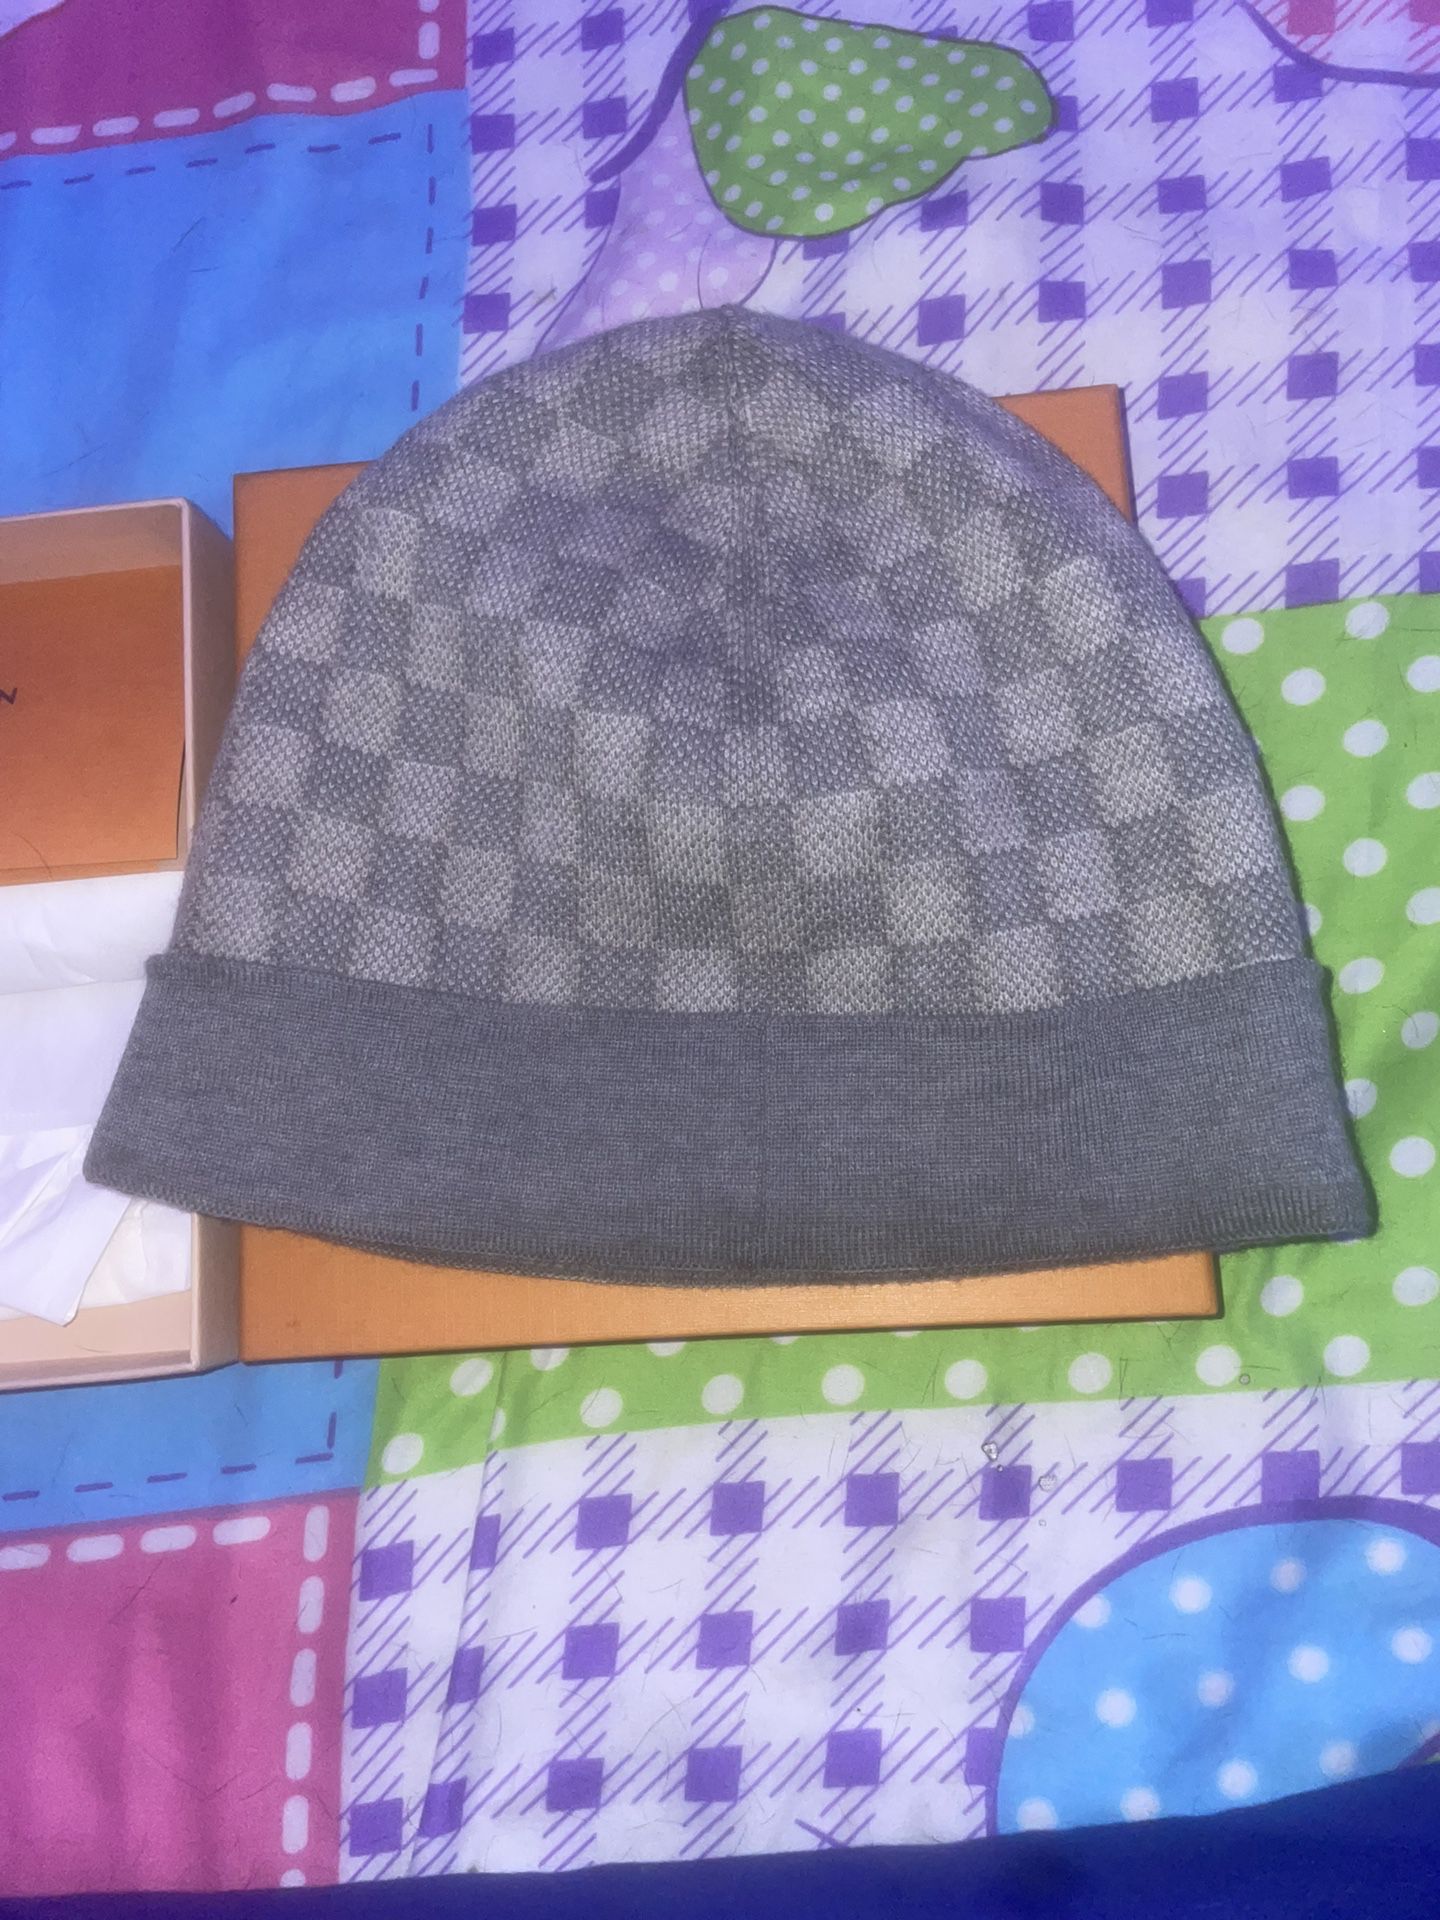 Louis Vuitton Hat for Sale in New York, NY - OfferUp